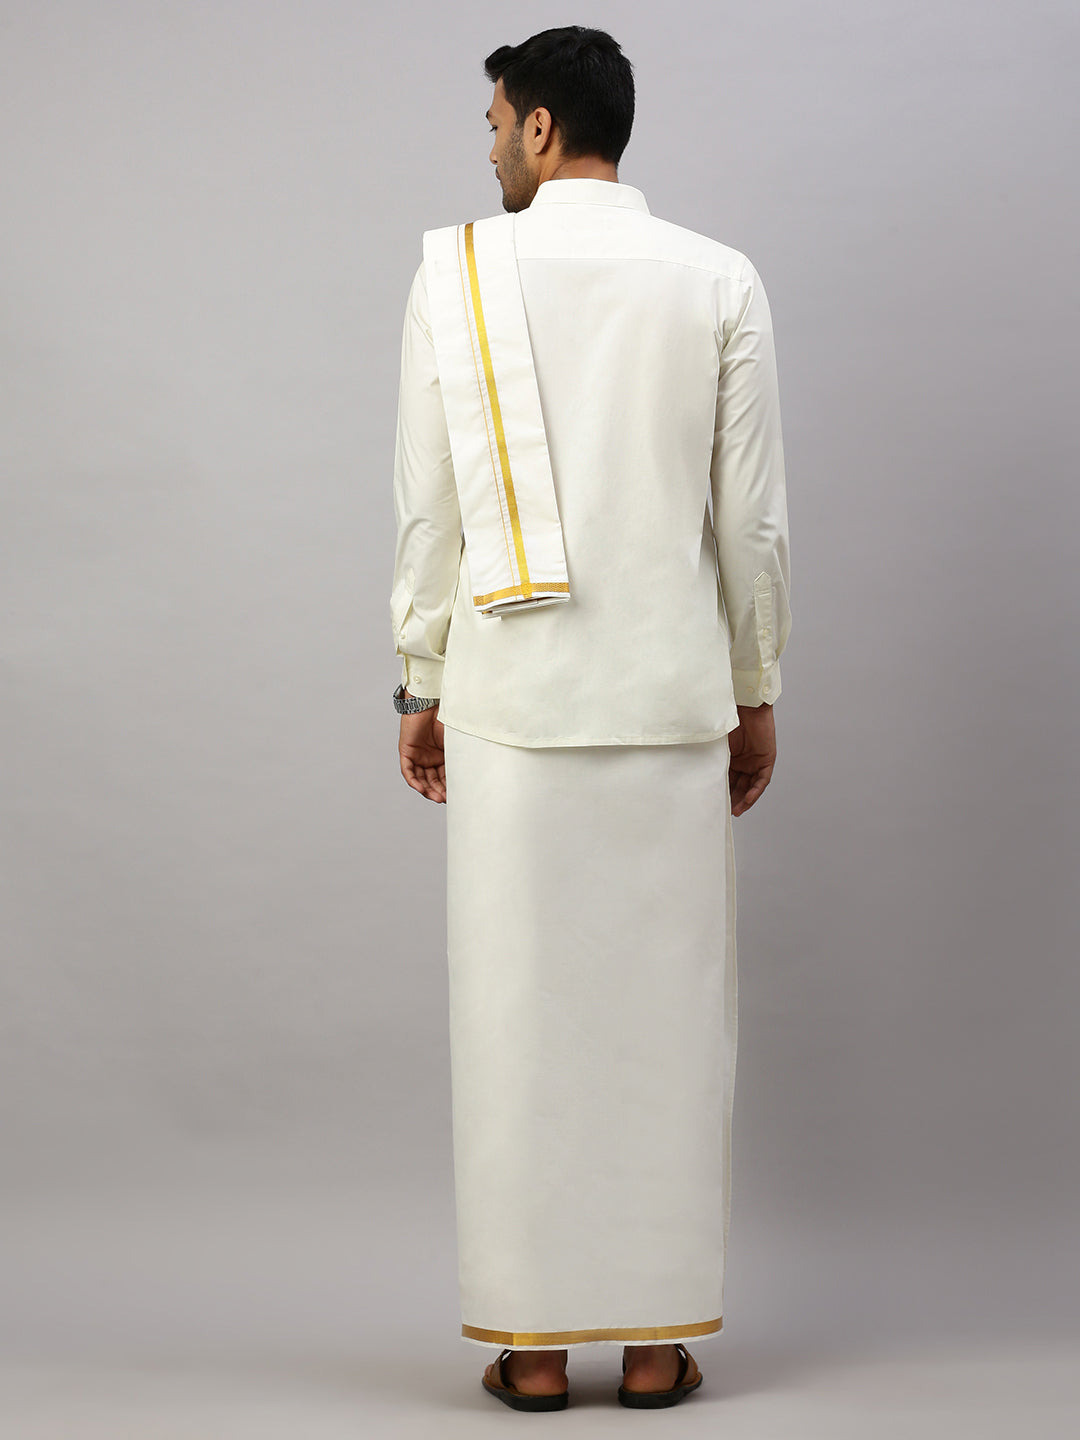 Mens Double Dhoti with Towel Cream with Gold Jari 3/4" Nithyanjali